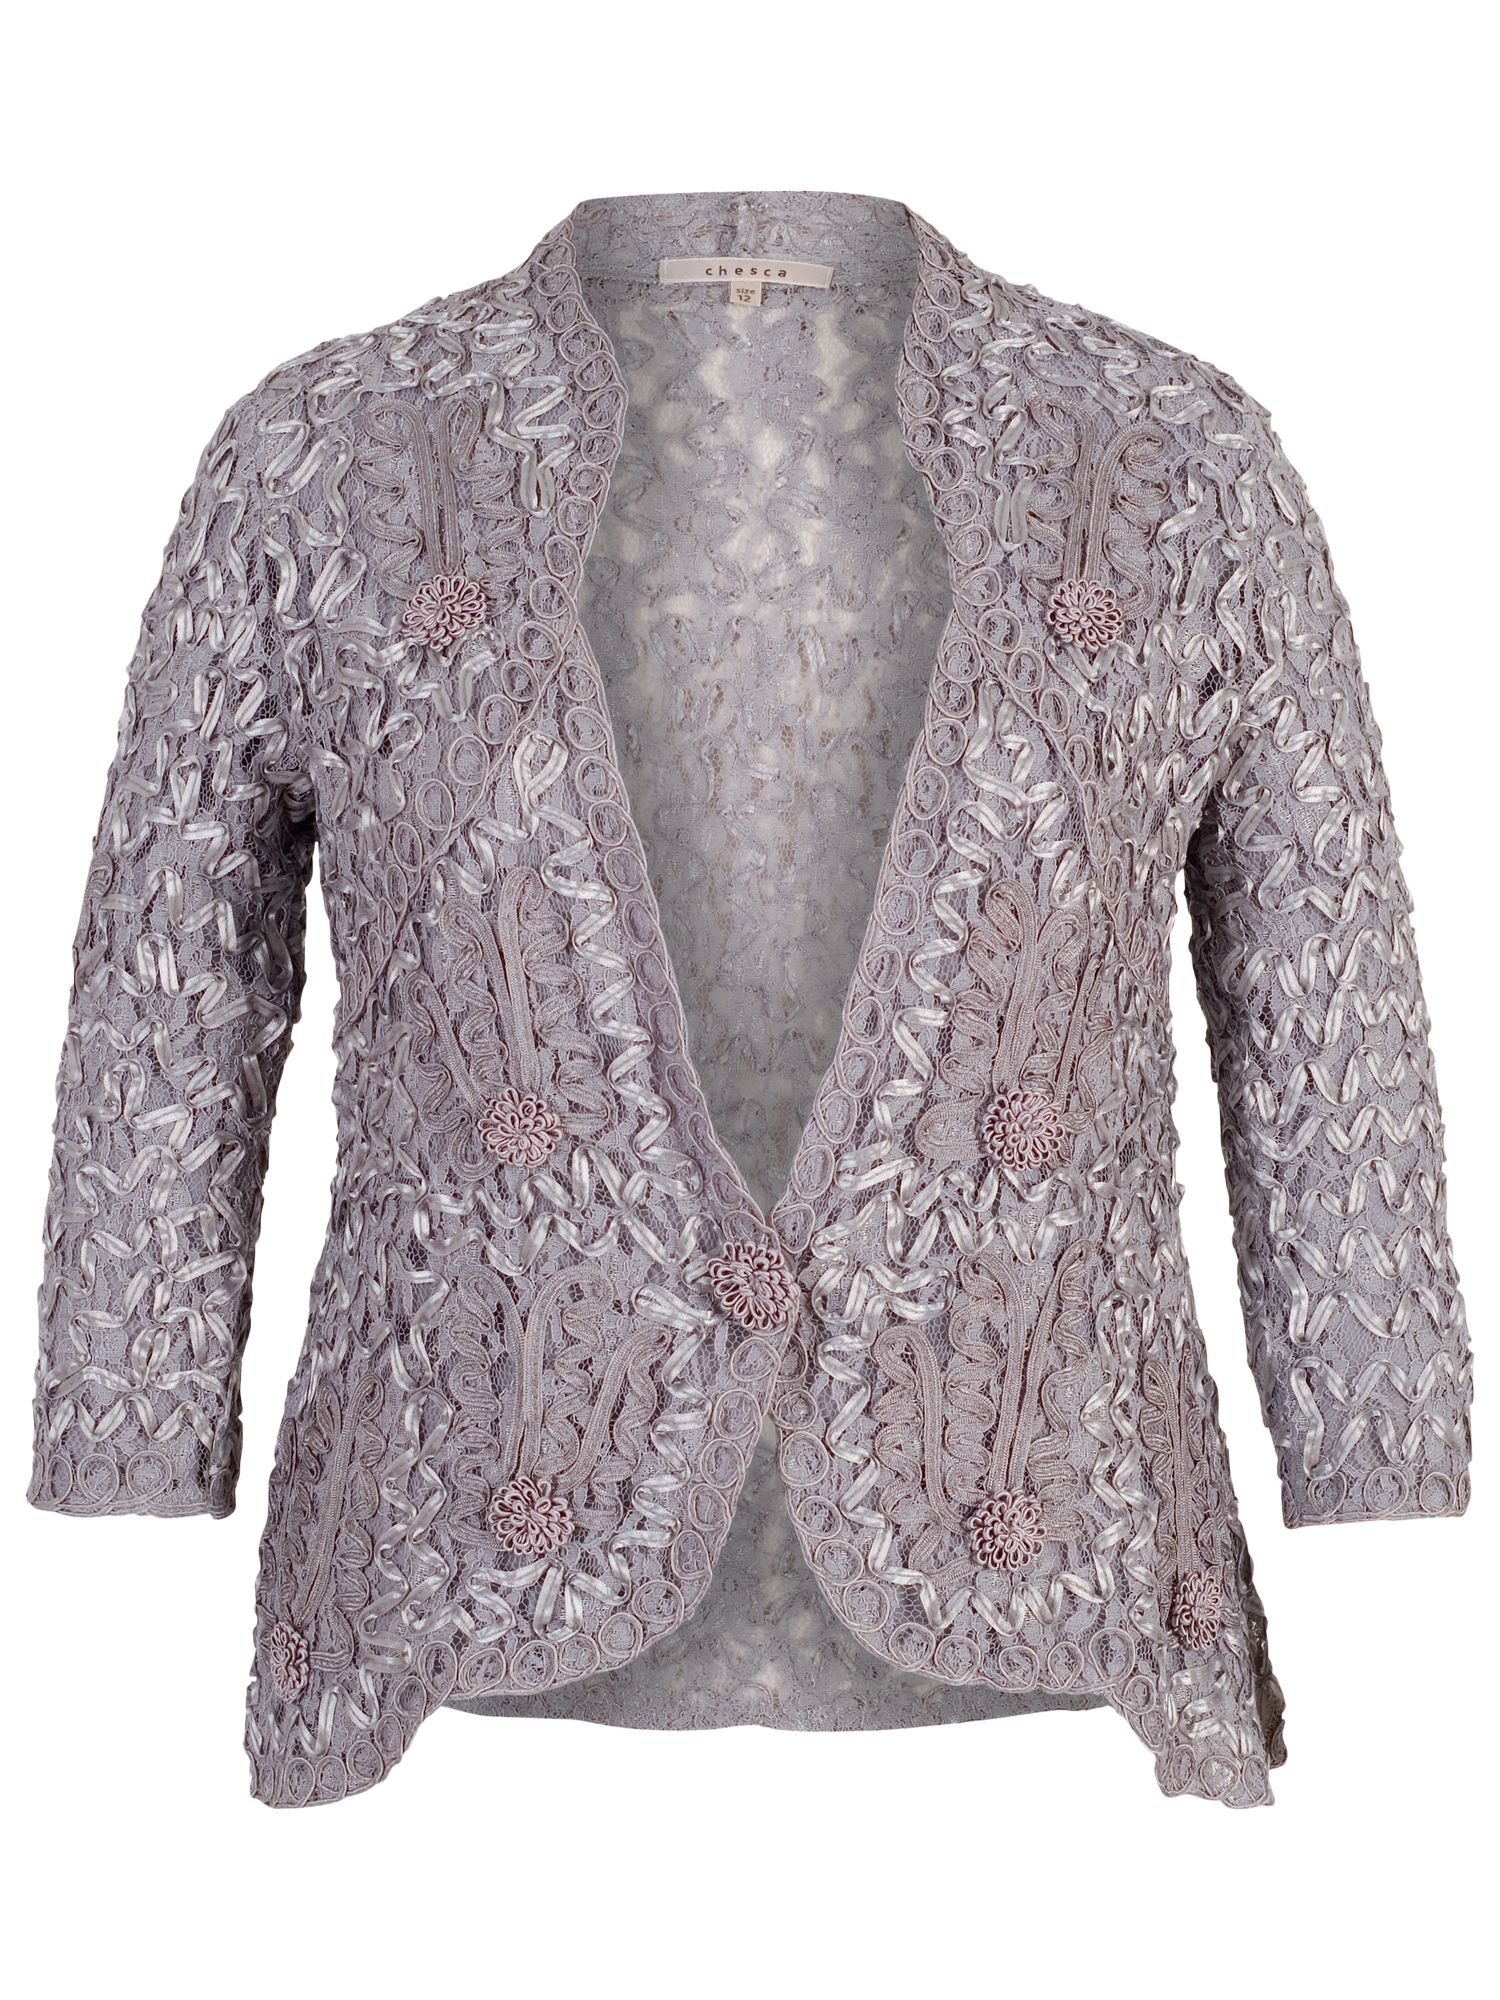 Chesca Lace Cornelli Embroidered Trim Jacket, Silver Grey at John Lewis ...